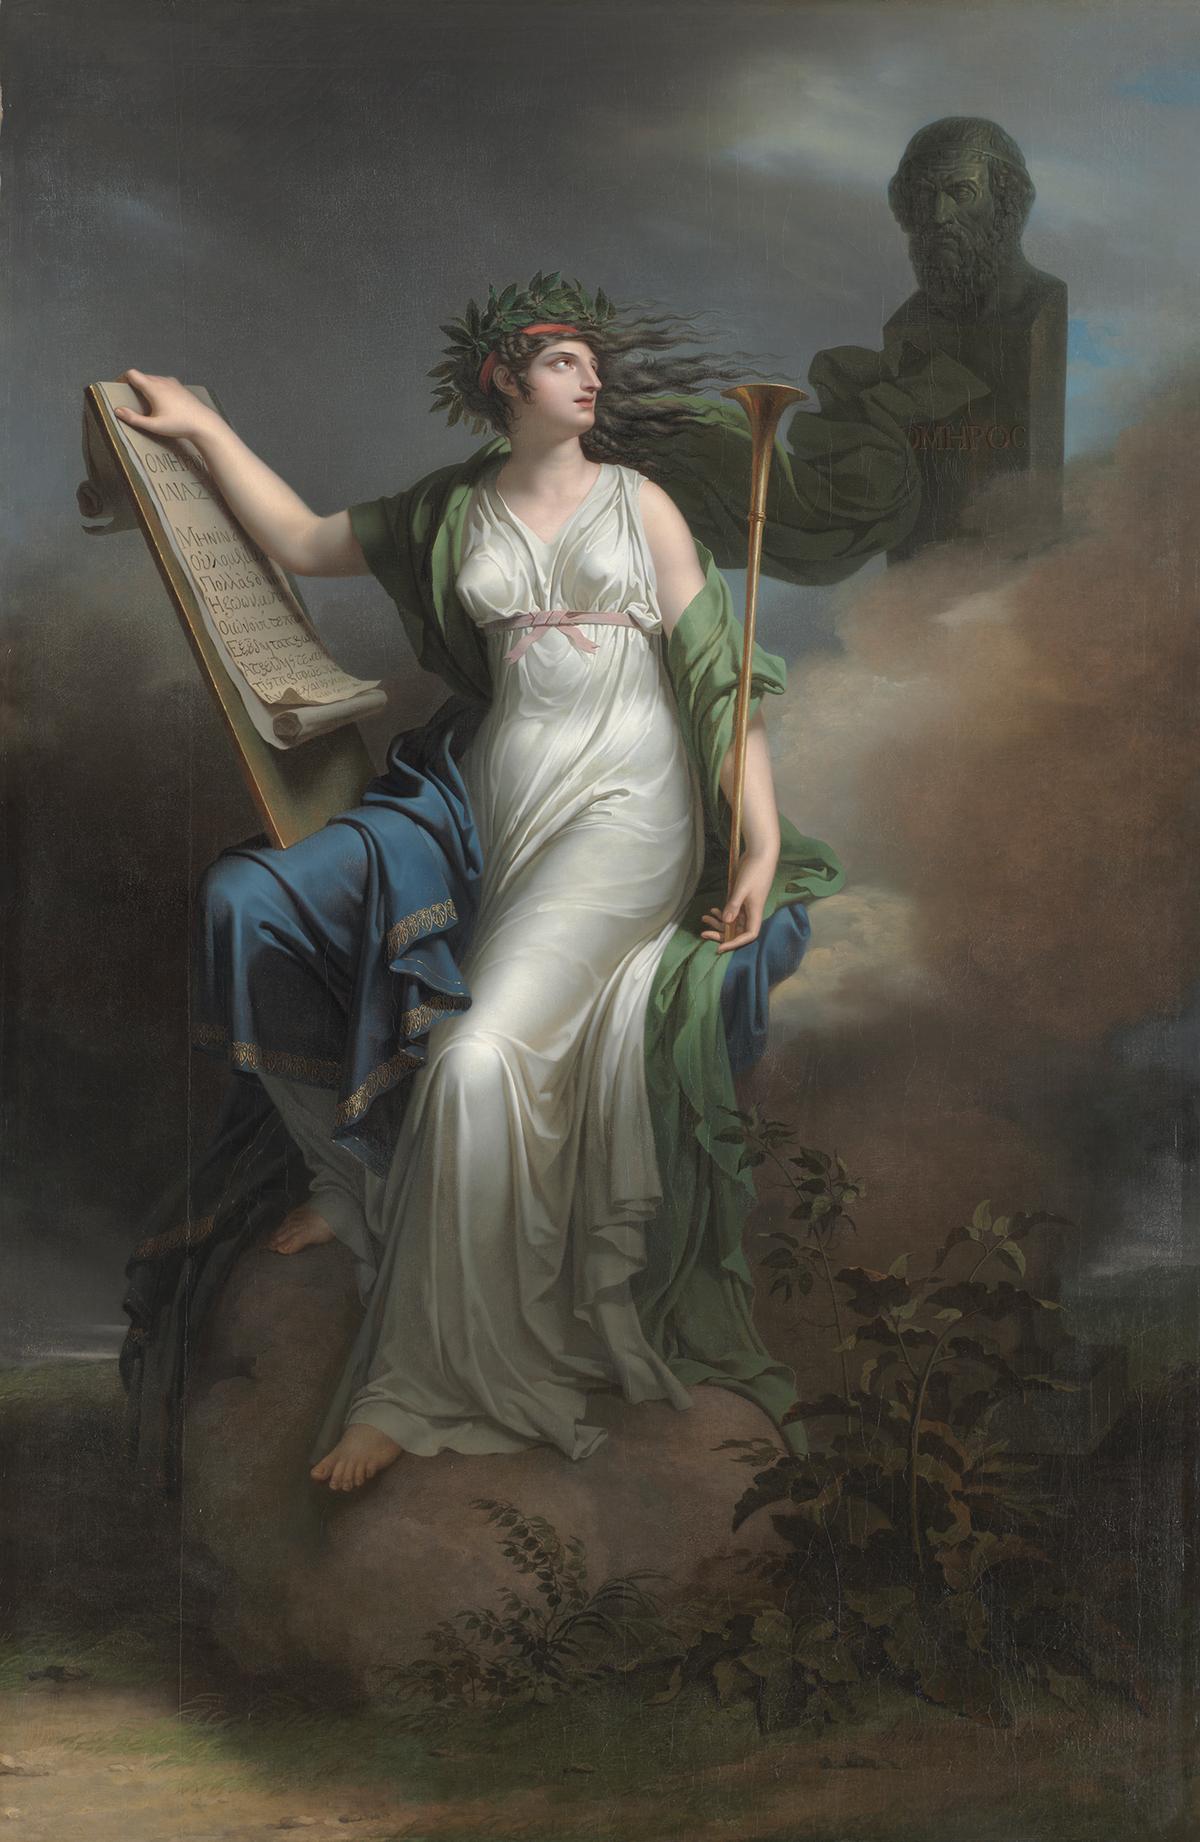 "Calliope, Muse of Epic Poetry," 1798, by Charles Meynier. Oil on canvas. The Cleveland Museum of Art. (Public Domain)